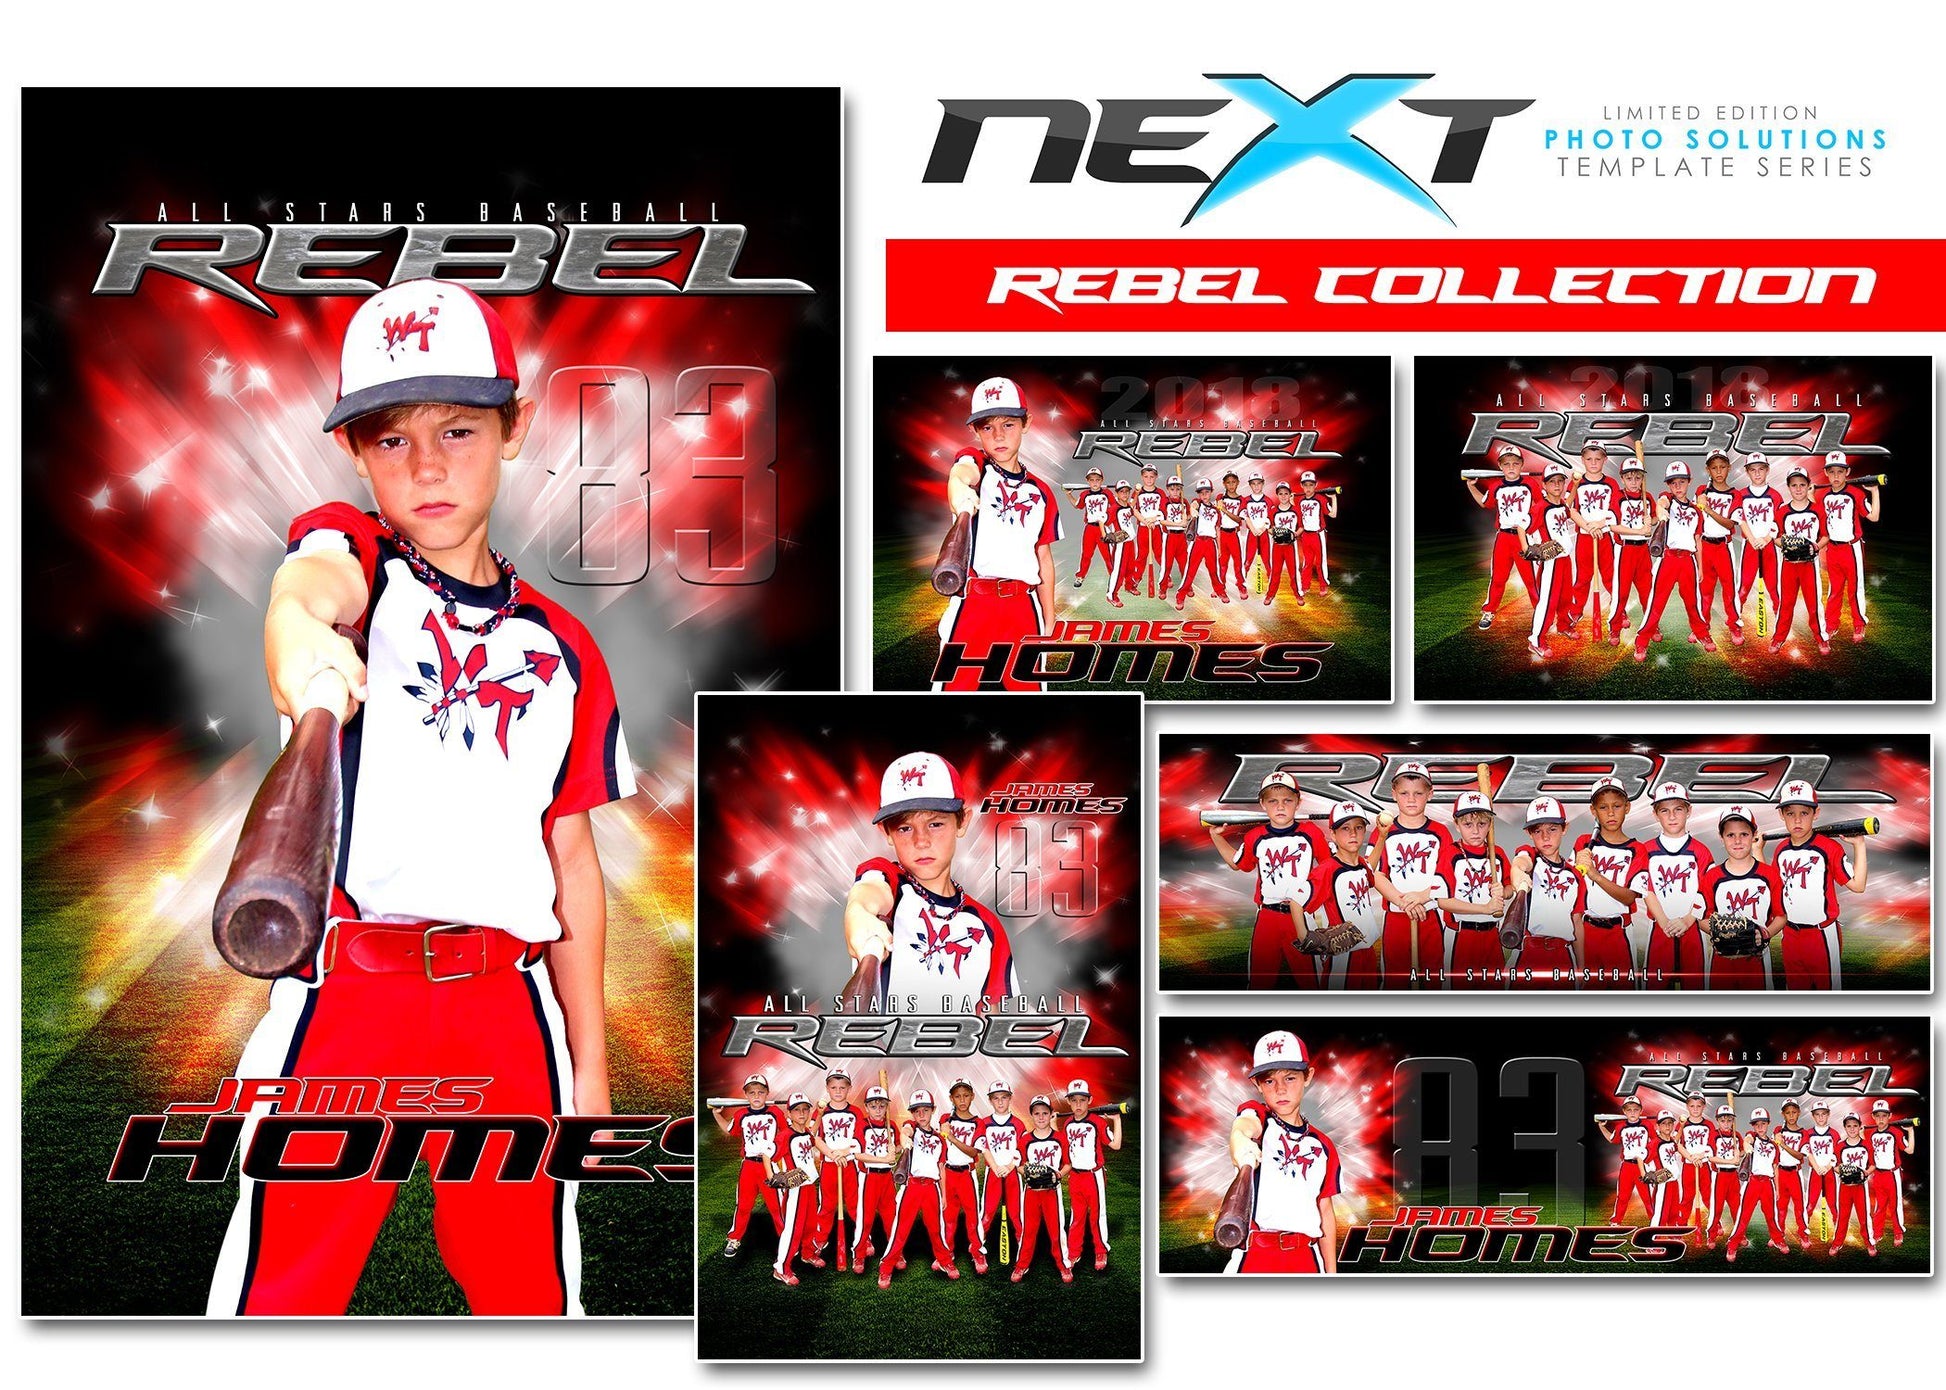 01 Full Set - REBEL Collection-Photoshop Template - Photo Solutions